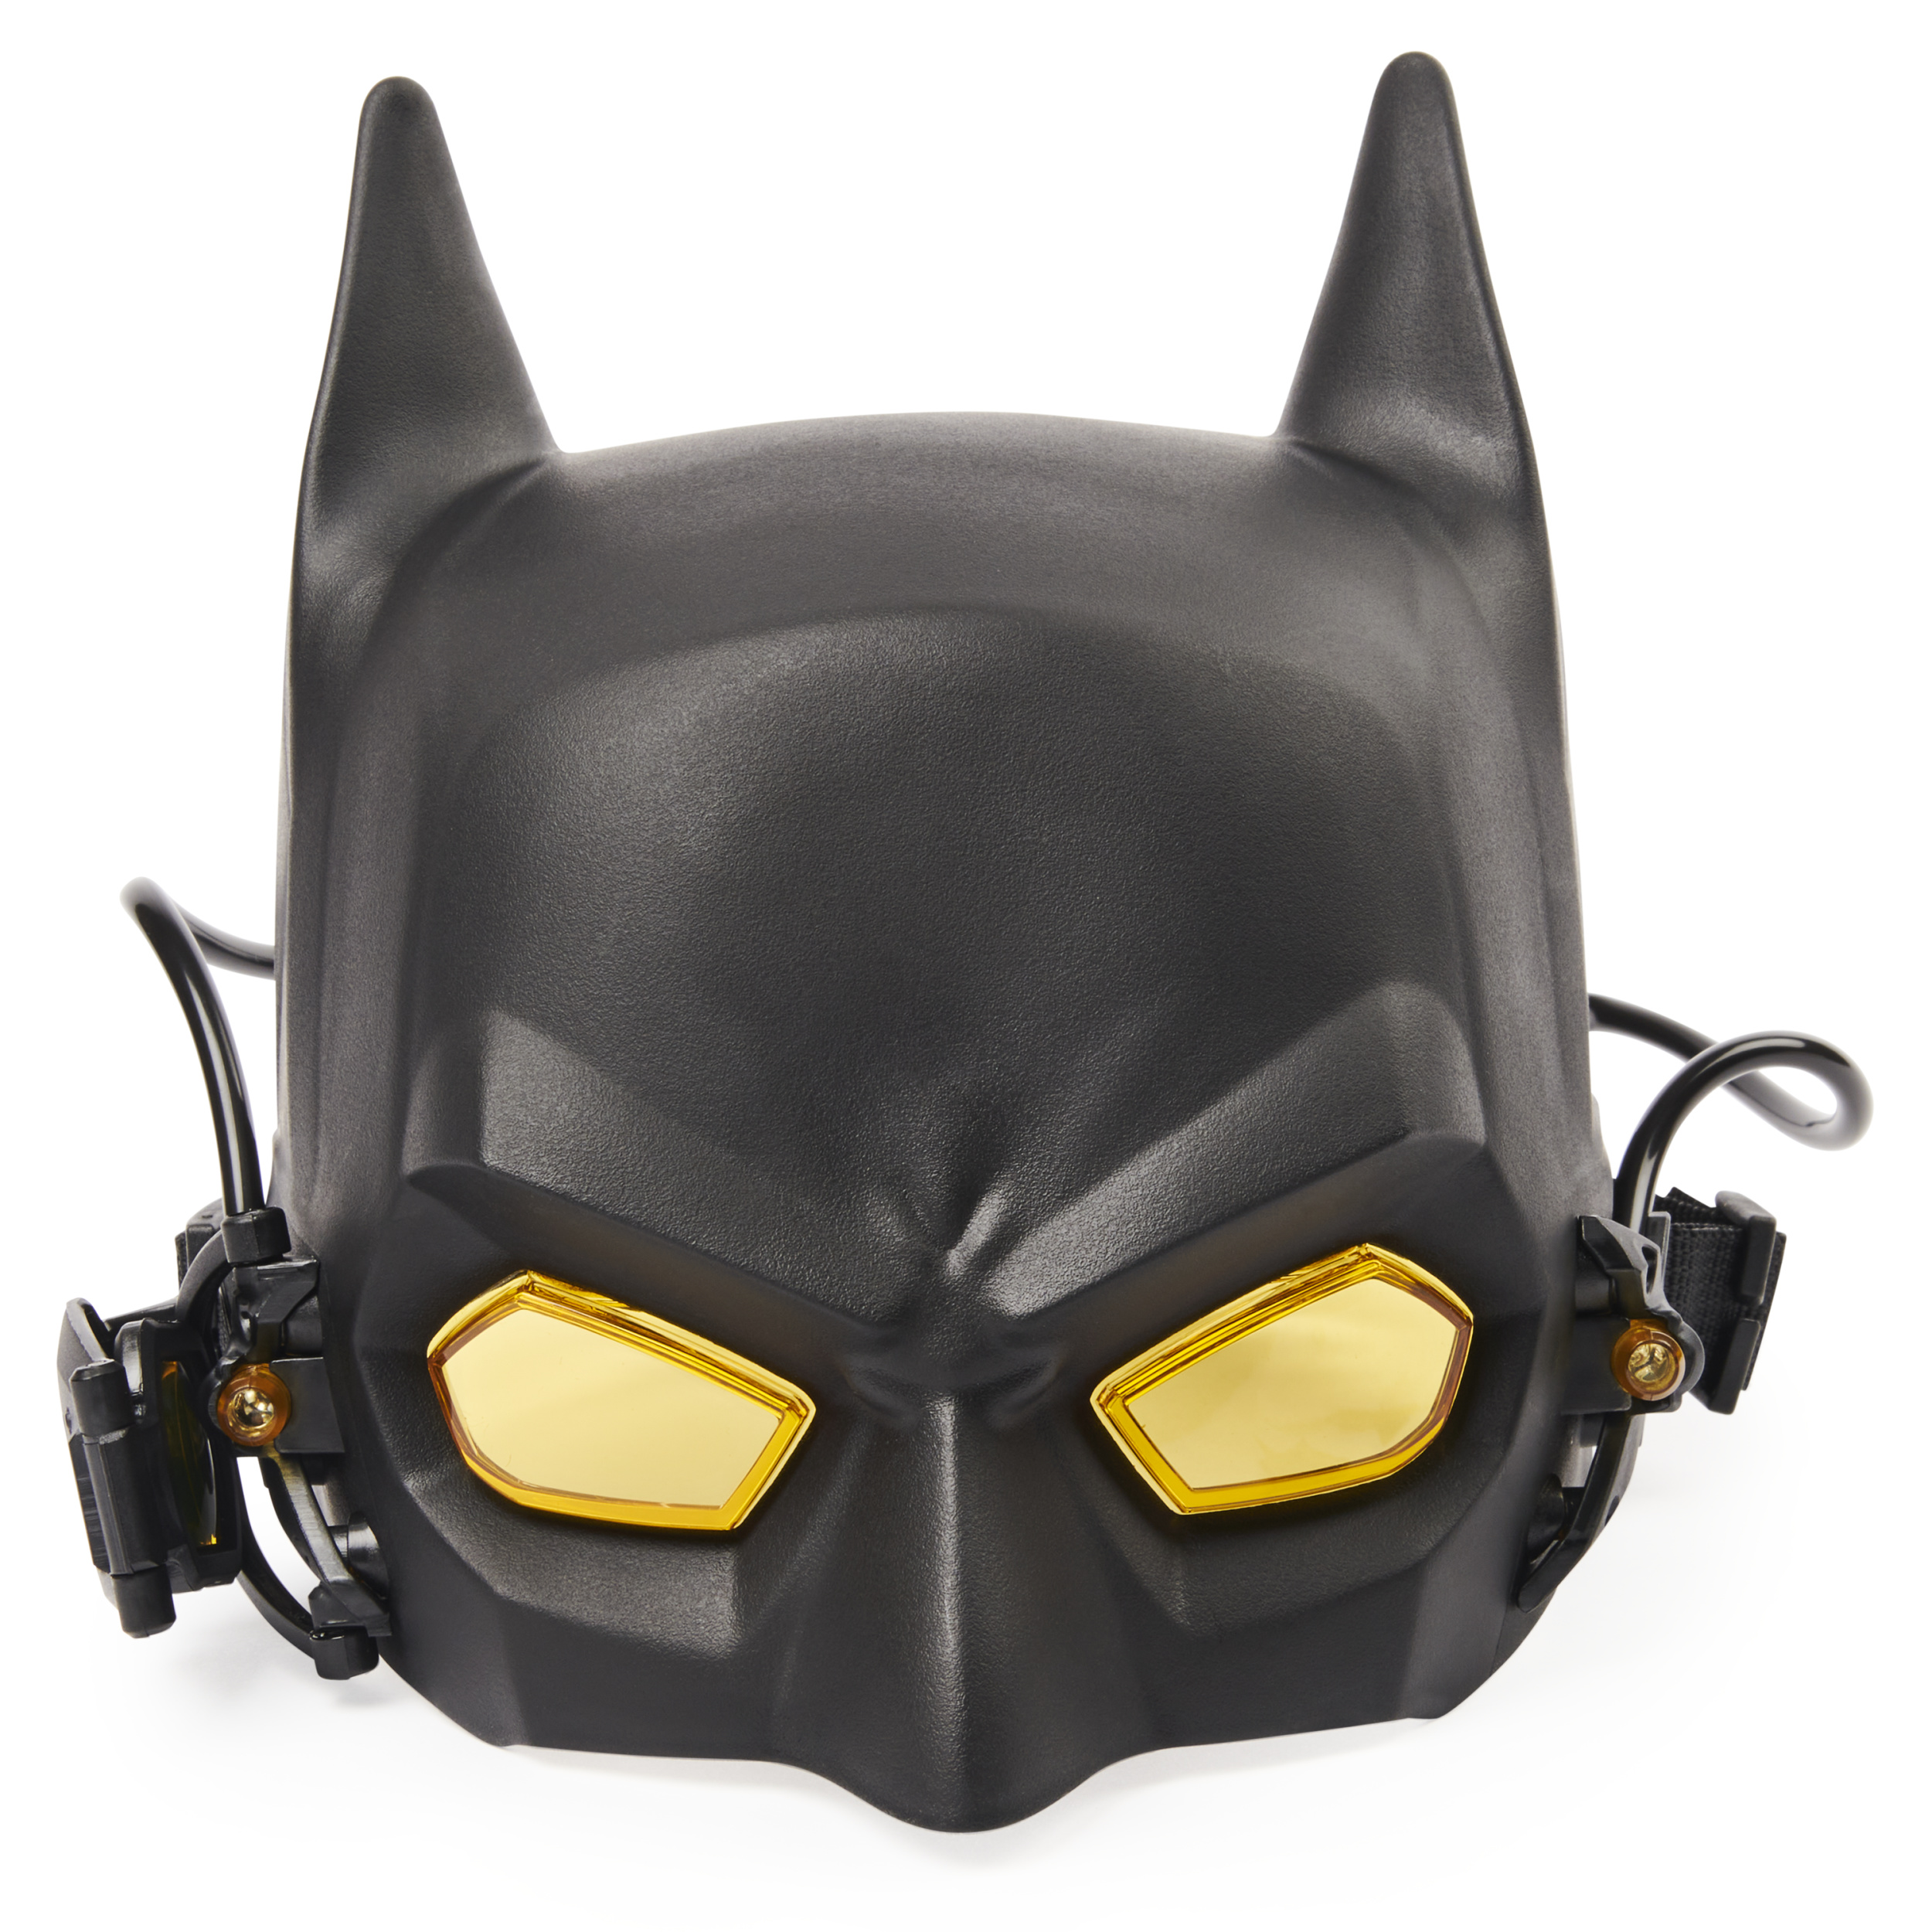 Batman Role-Play Tech Mask with Lights and Magnification Lens, for Kids Aged 4 and up - image 1 of 7